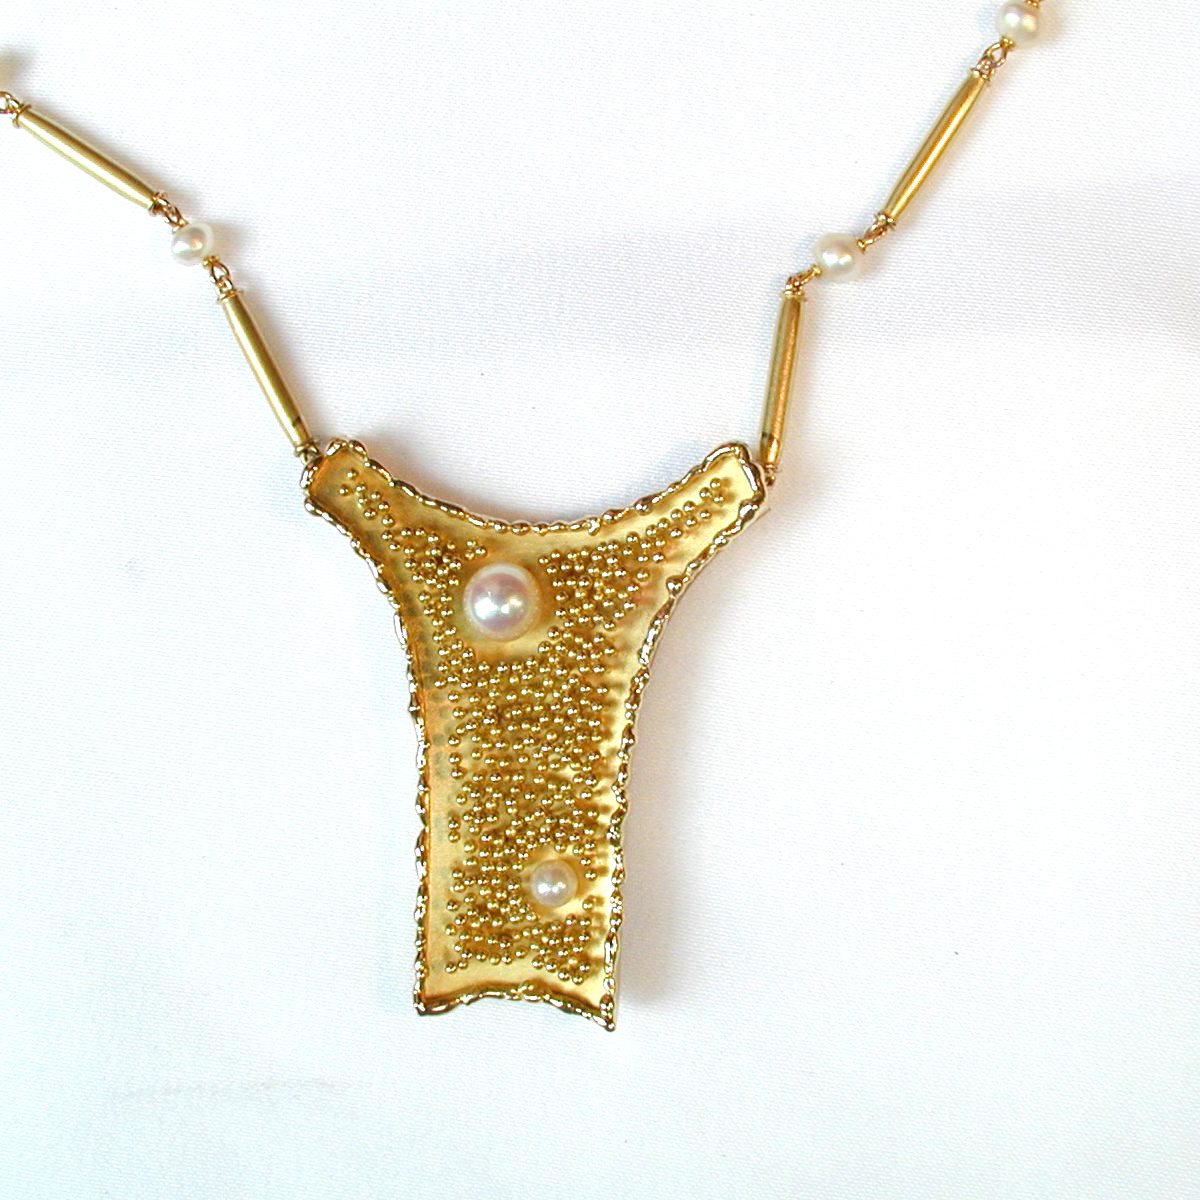 Collier Gold Perle